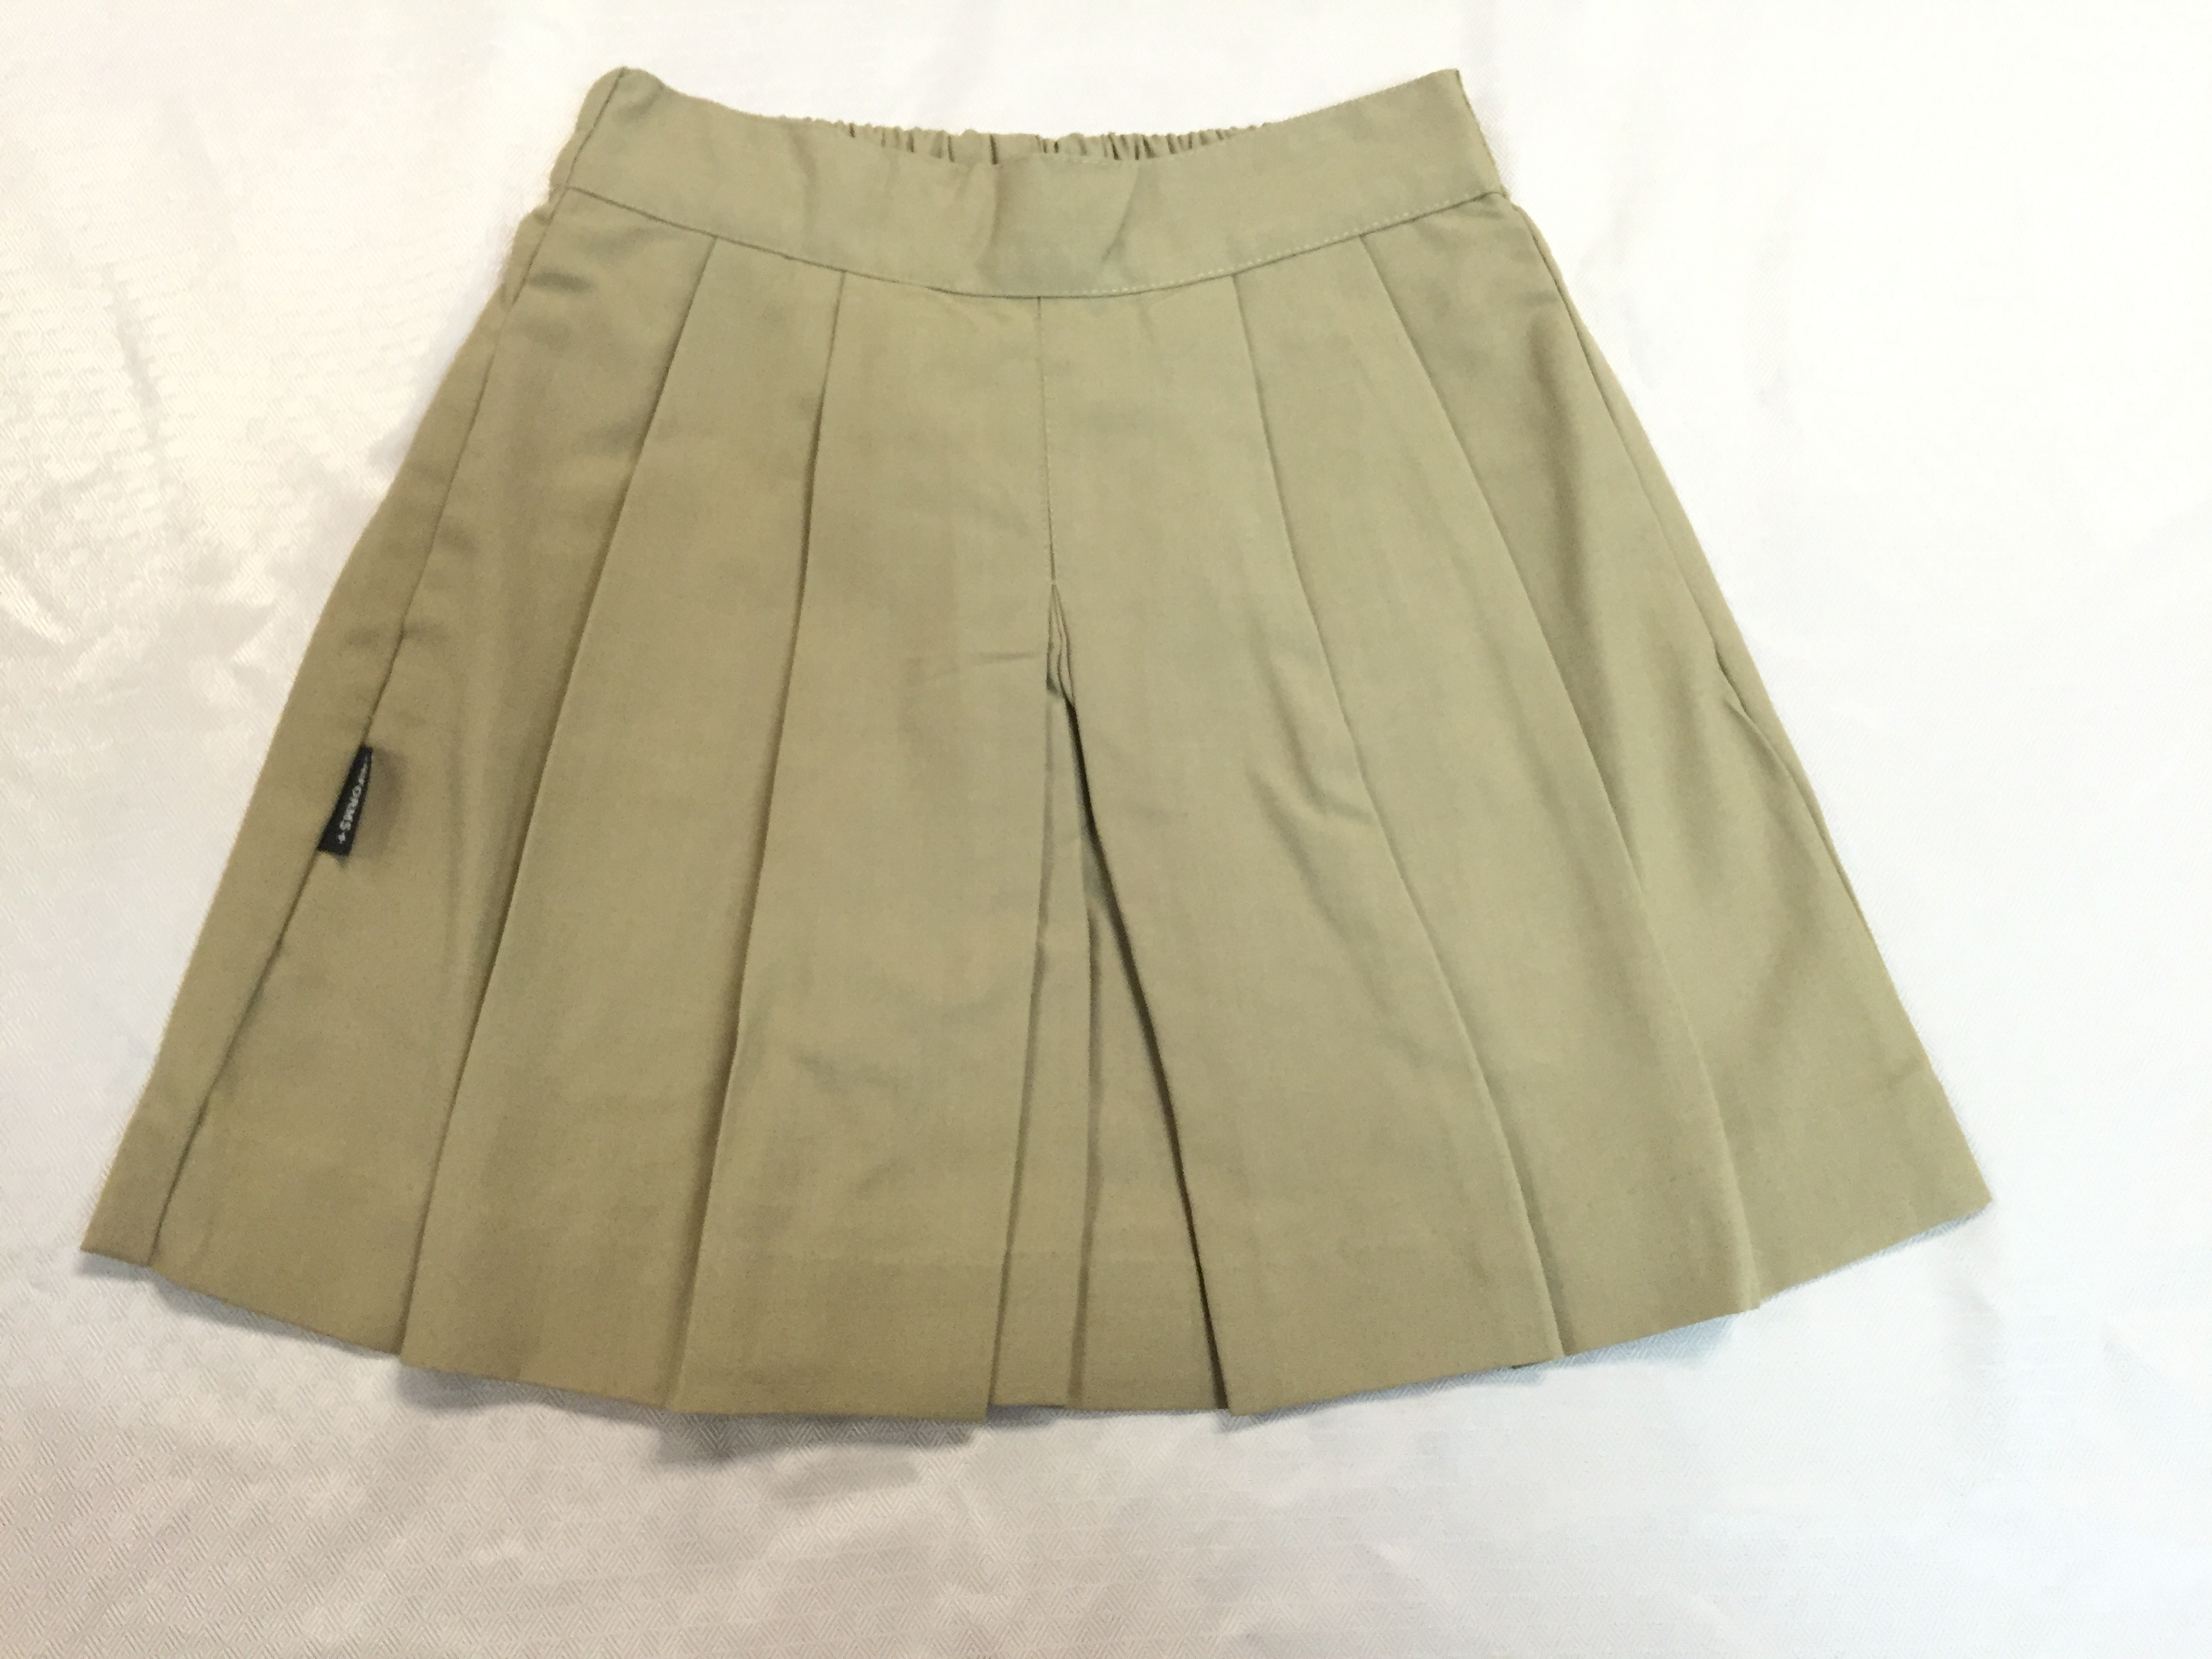 Clearance Pleated Culottes, Khaki – Sizes 2-7 Youth (Sales are Final on Clearance Culottes)